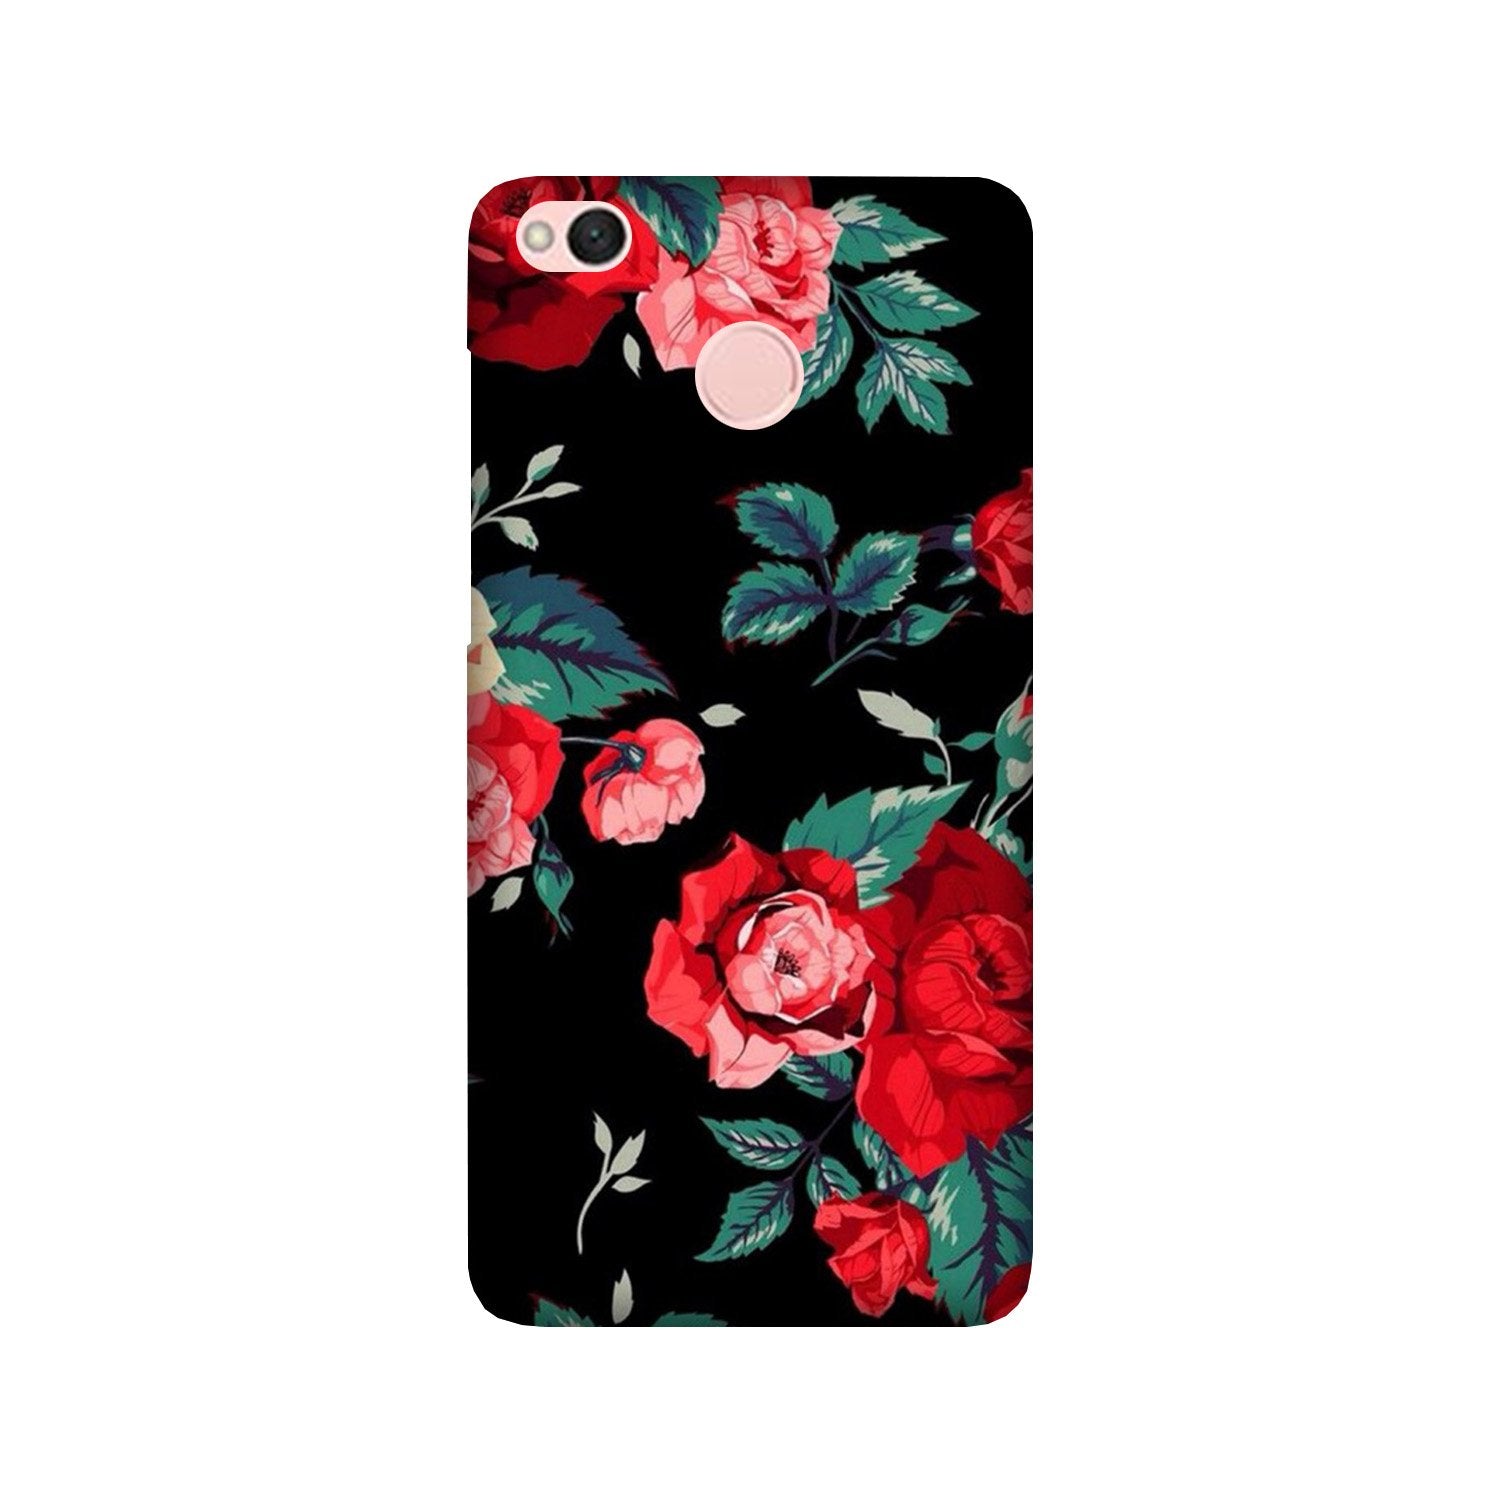 Red Rose2 Case for Redmi 4